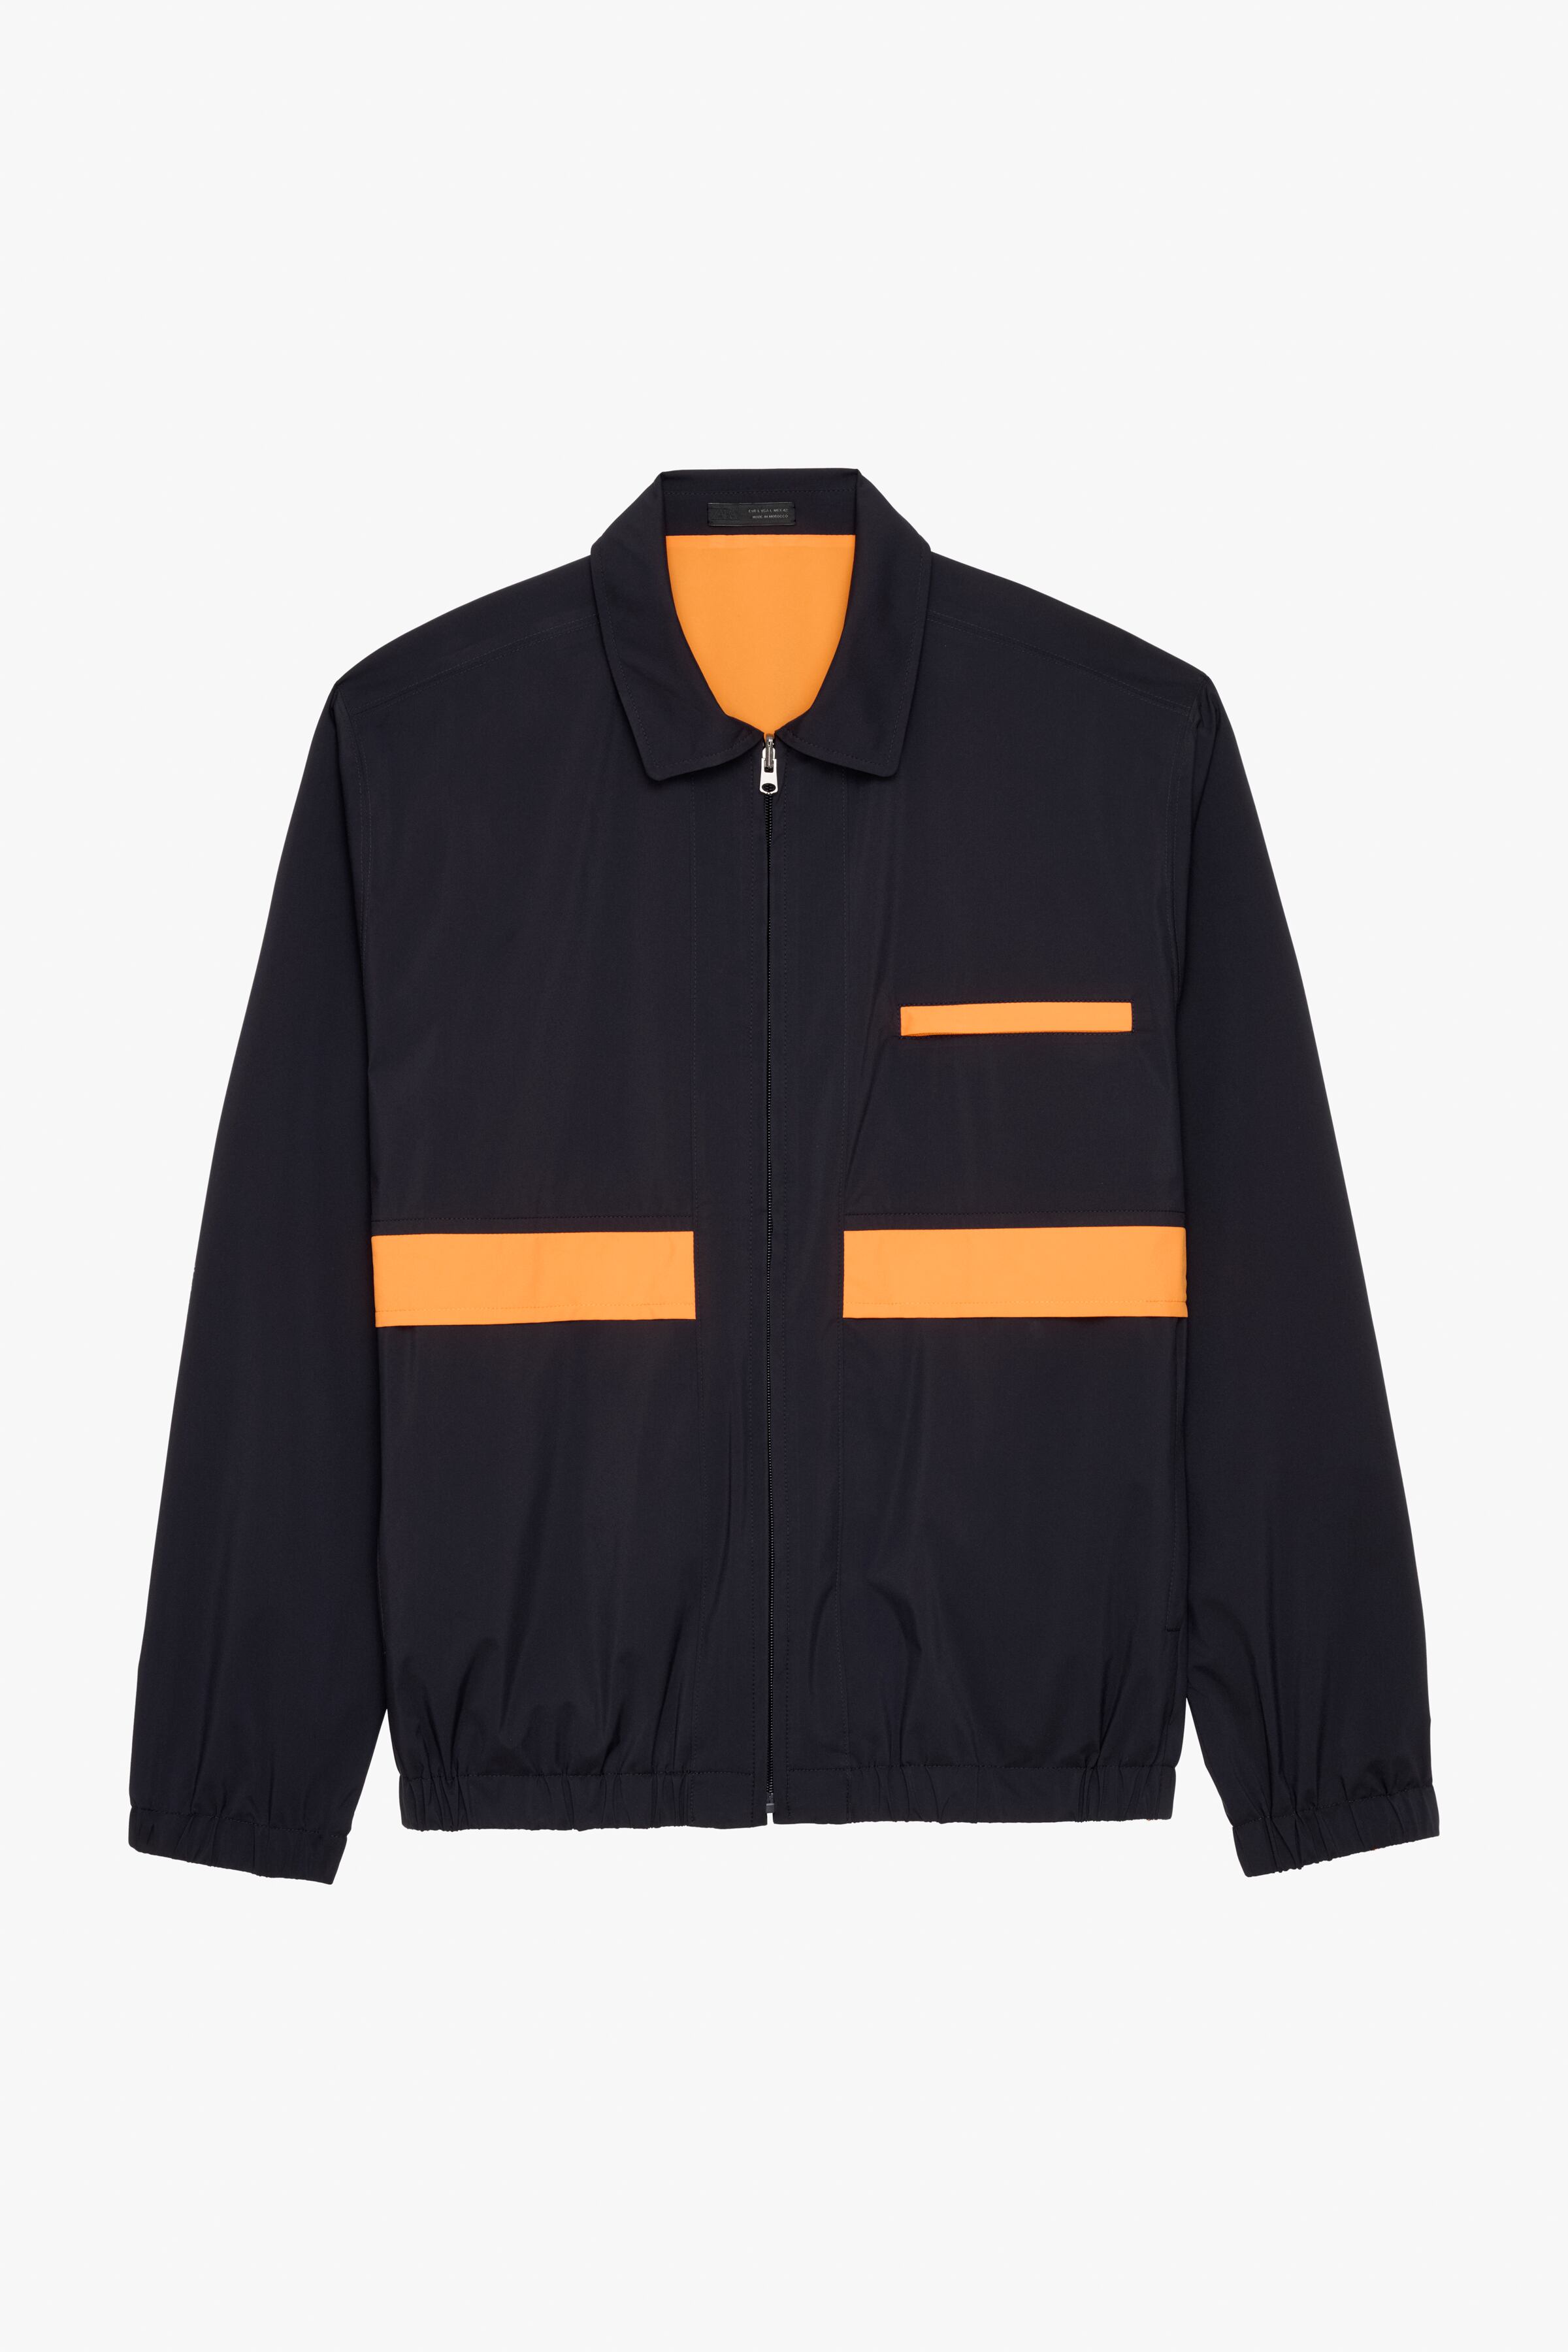 Zara REVERSIBLE JACKET LIMITED EDITION | Mall of America®